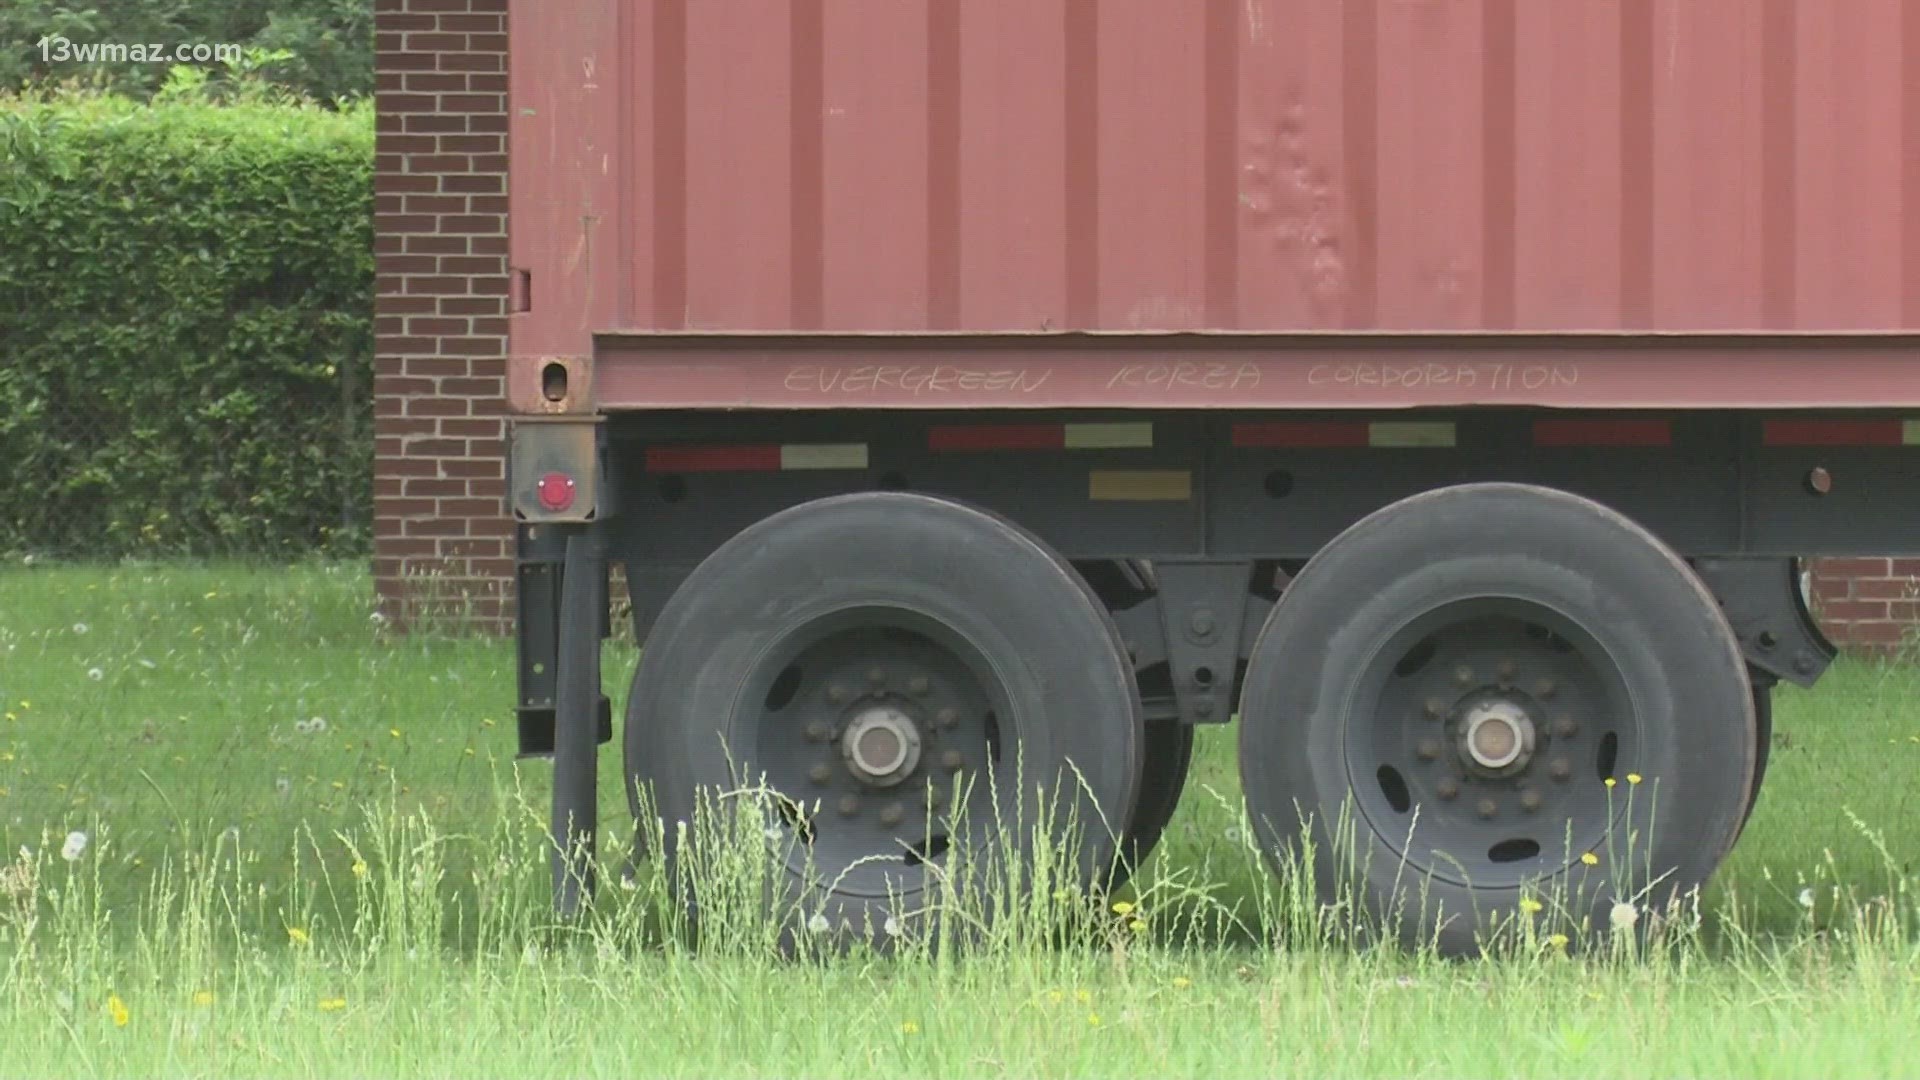 Illegal truck parking is provoking the ire of some Warner Robins residents.